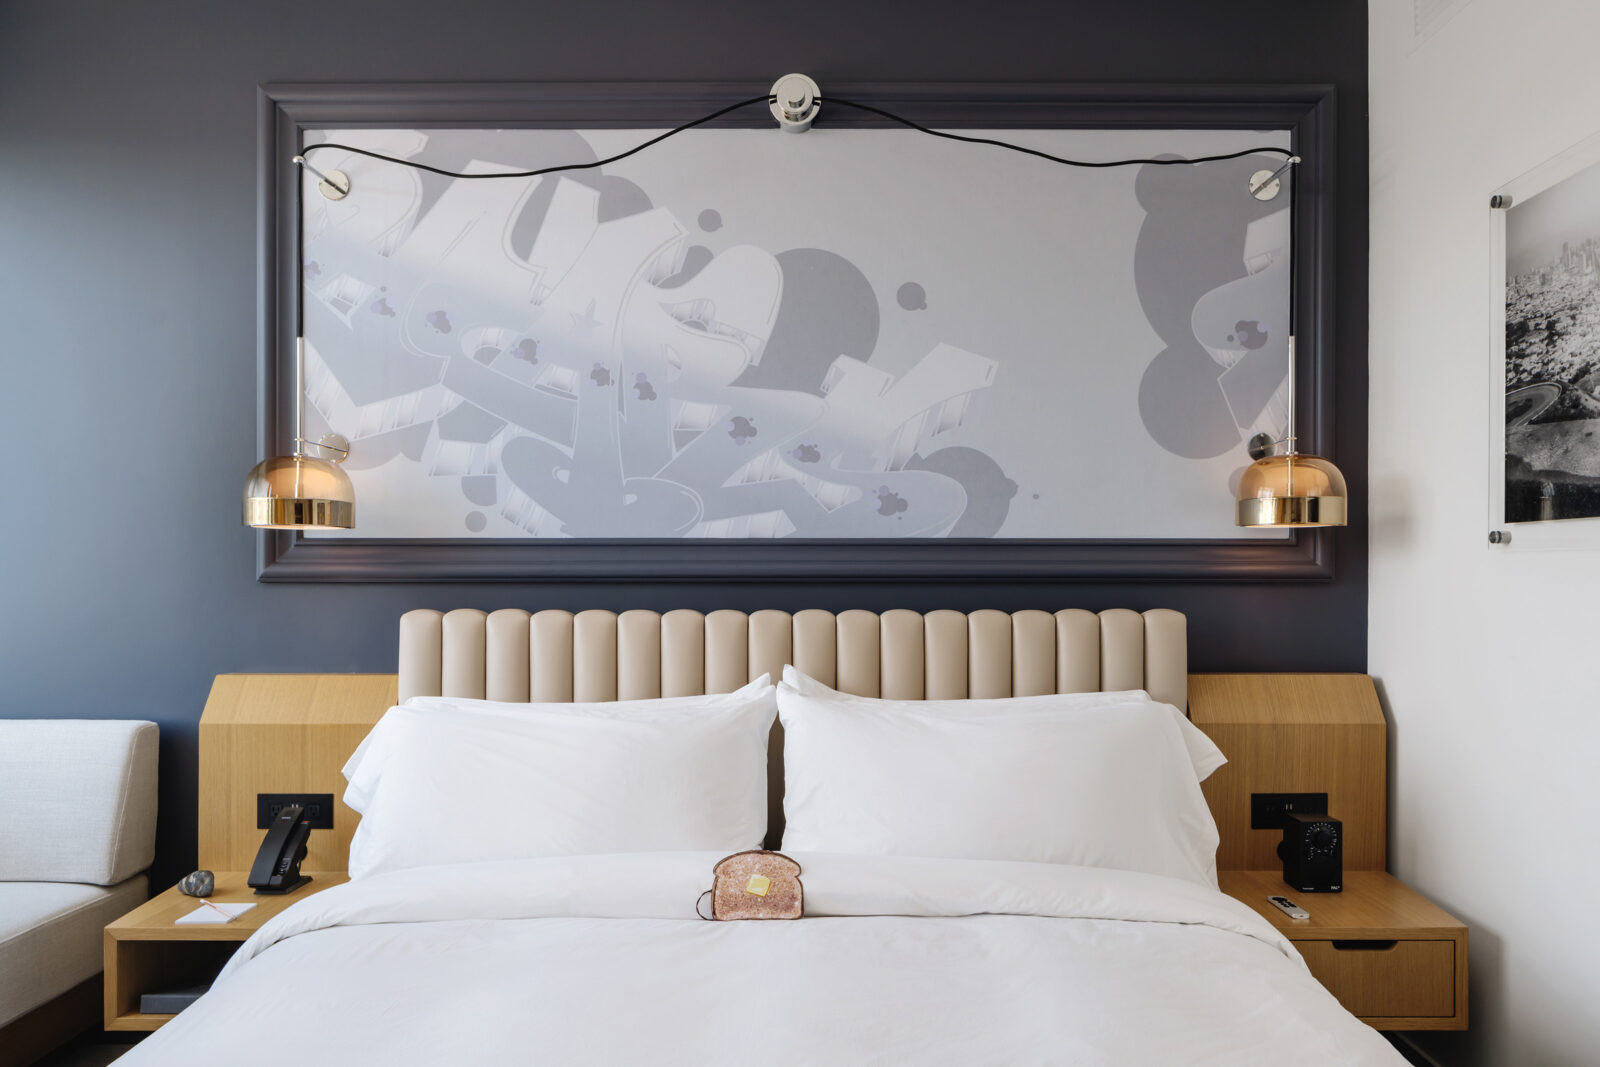 The room features a king-sized bed with a wall-fitted portrait just above it.